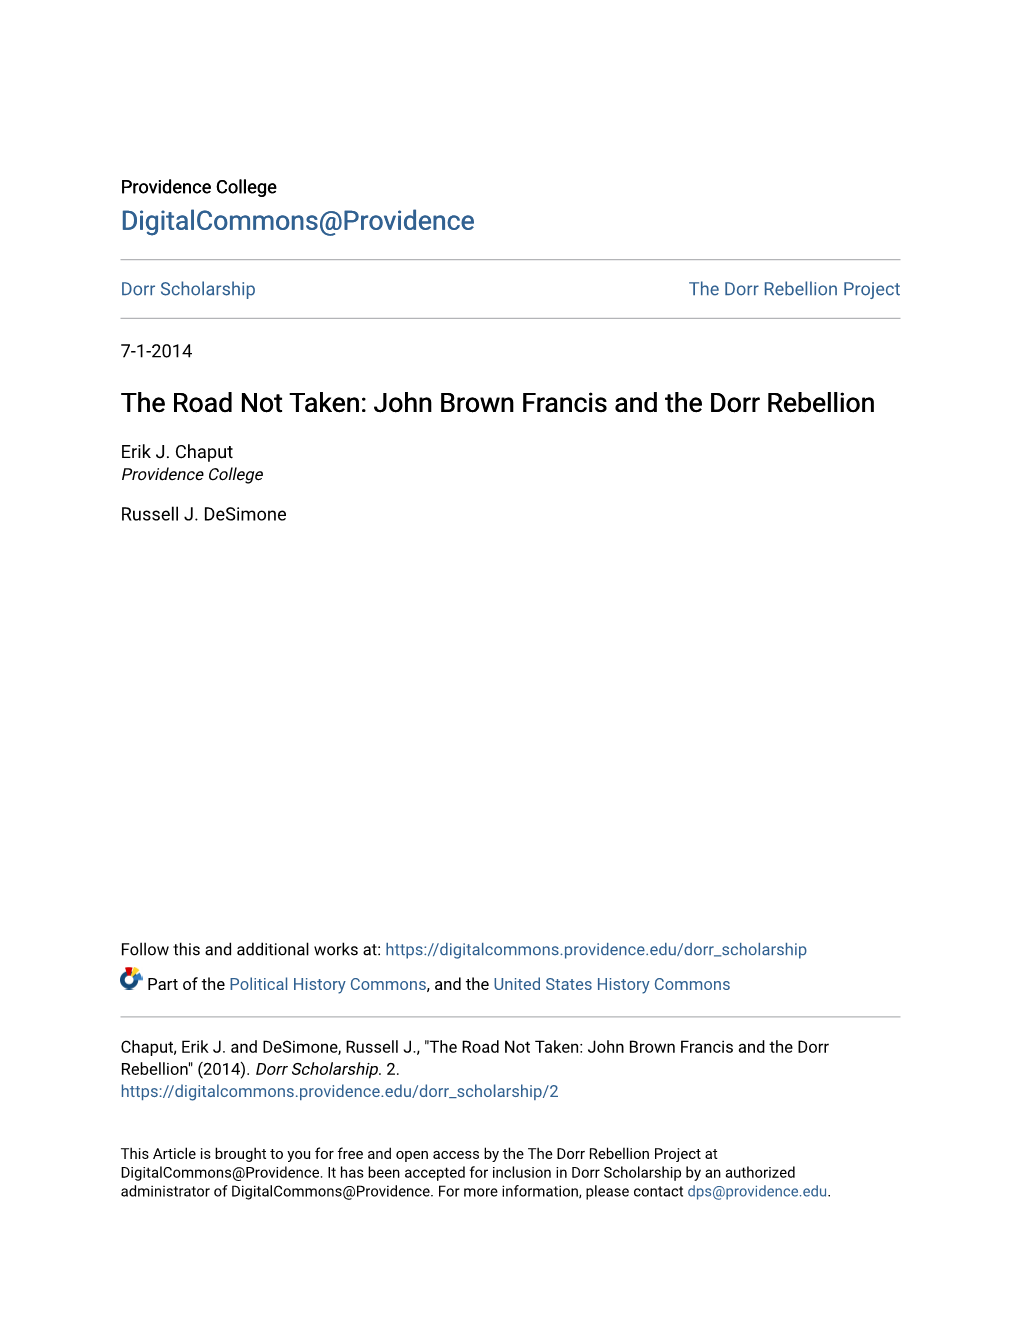 The Road Not Taken: John Brown Francis and the Dorr Rebellion